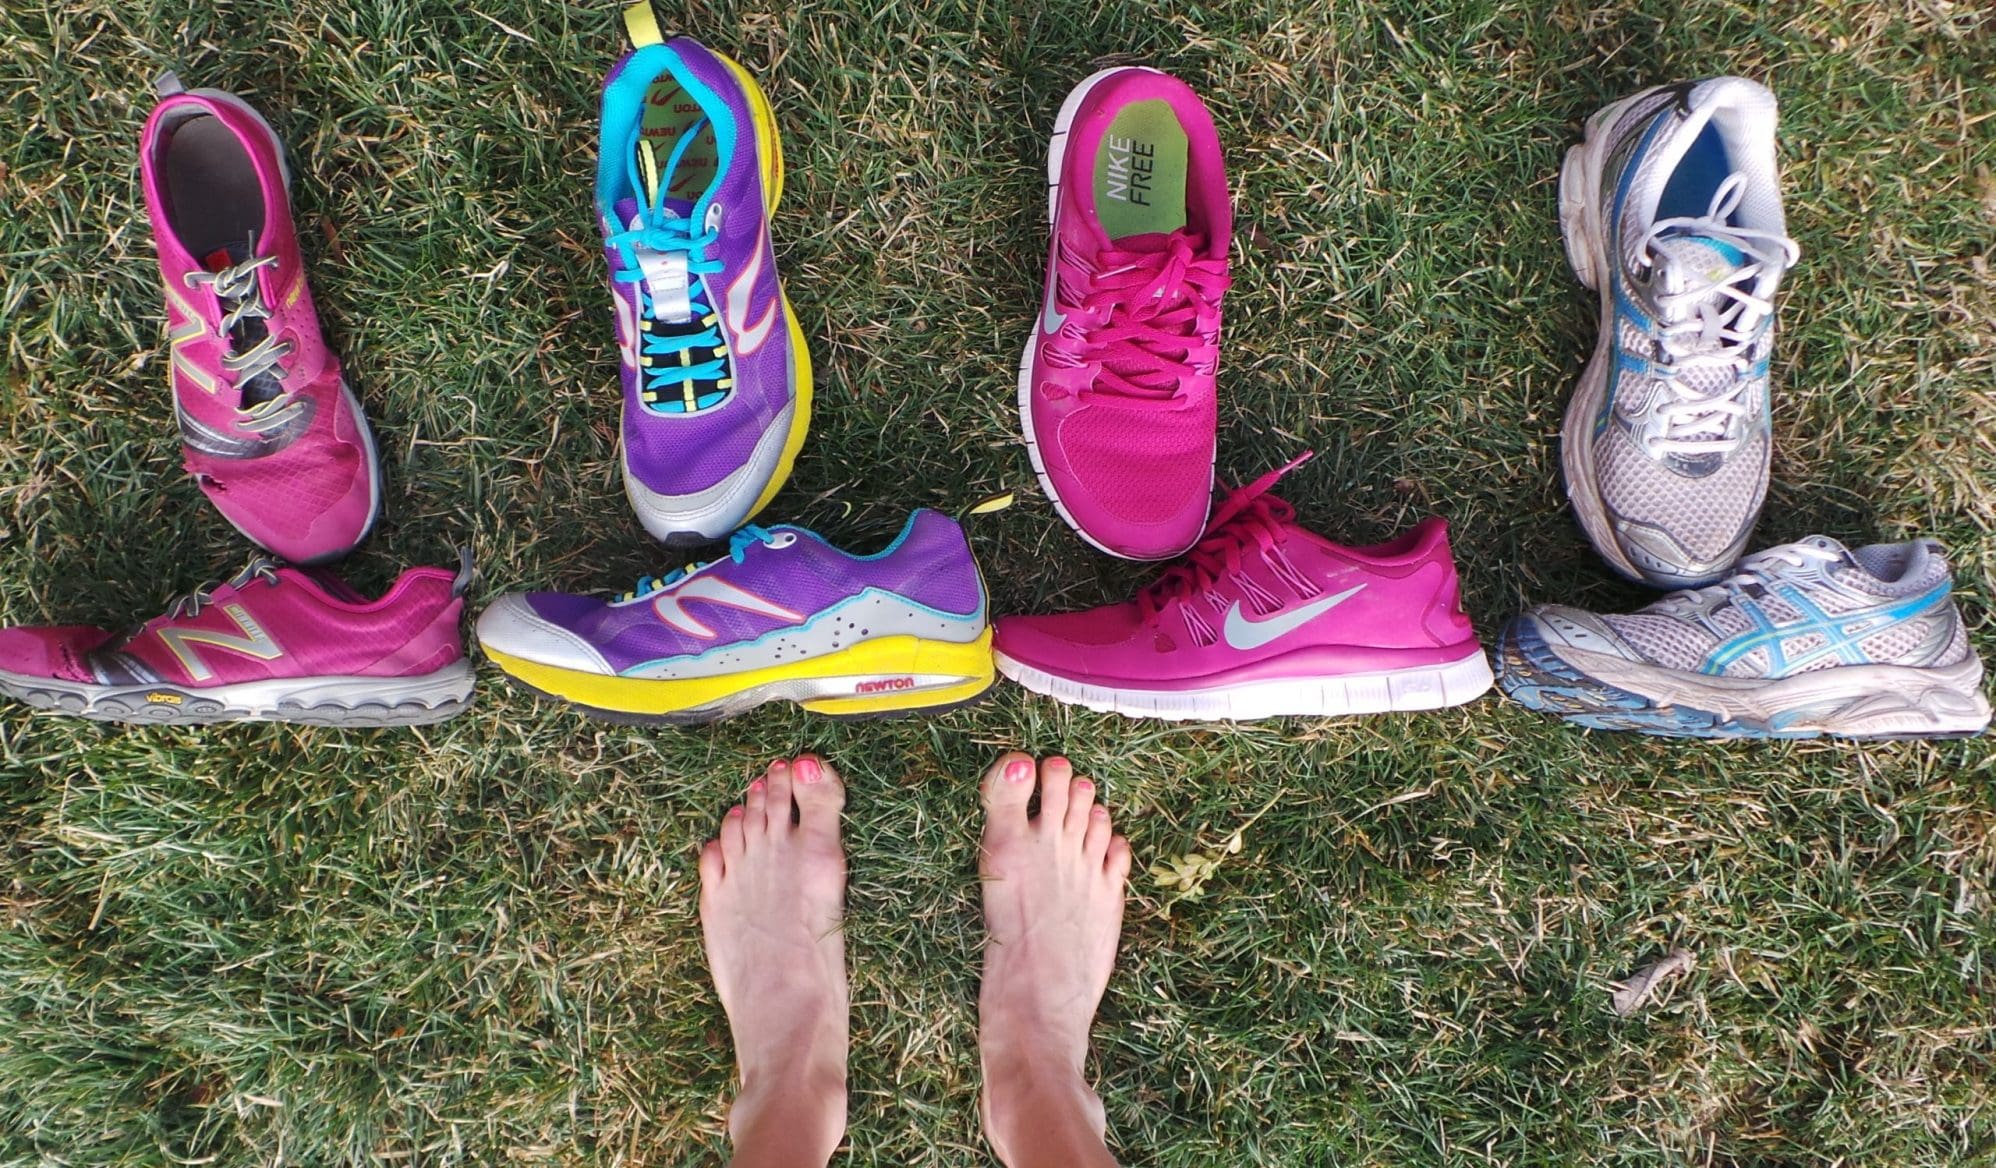 Is Barefoot the way to go? New Research in Running Shoe Design (updated)